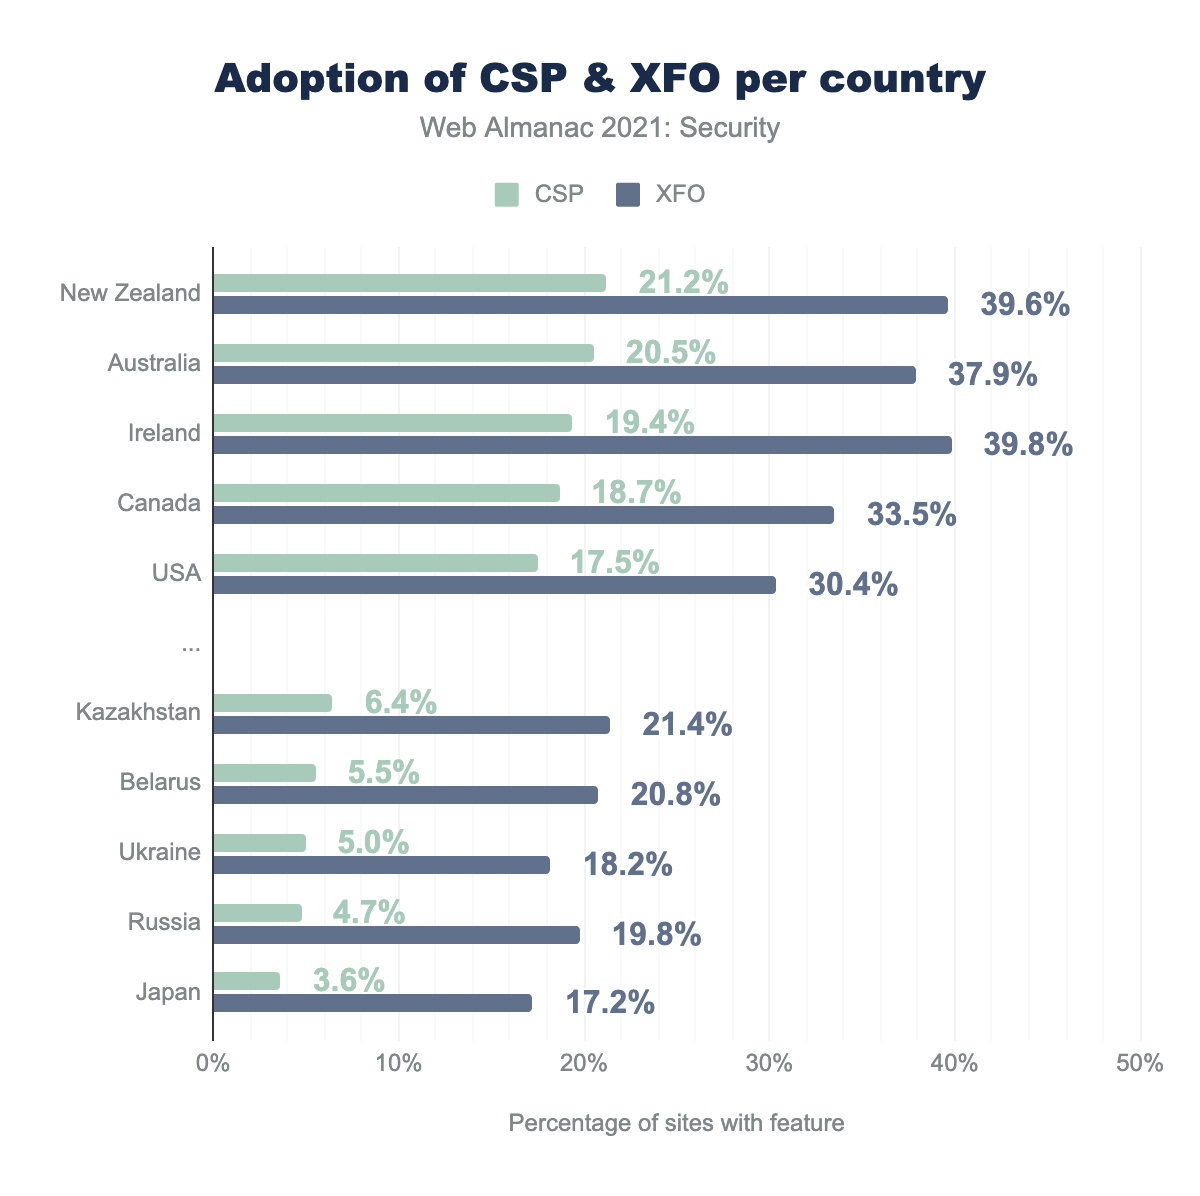 Adoption of CSP and XFO per country.